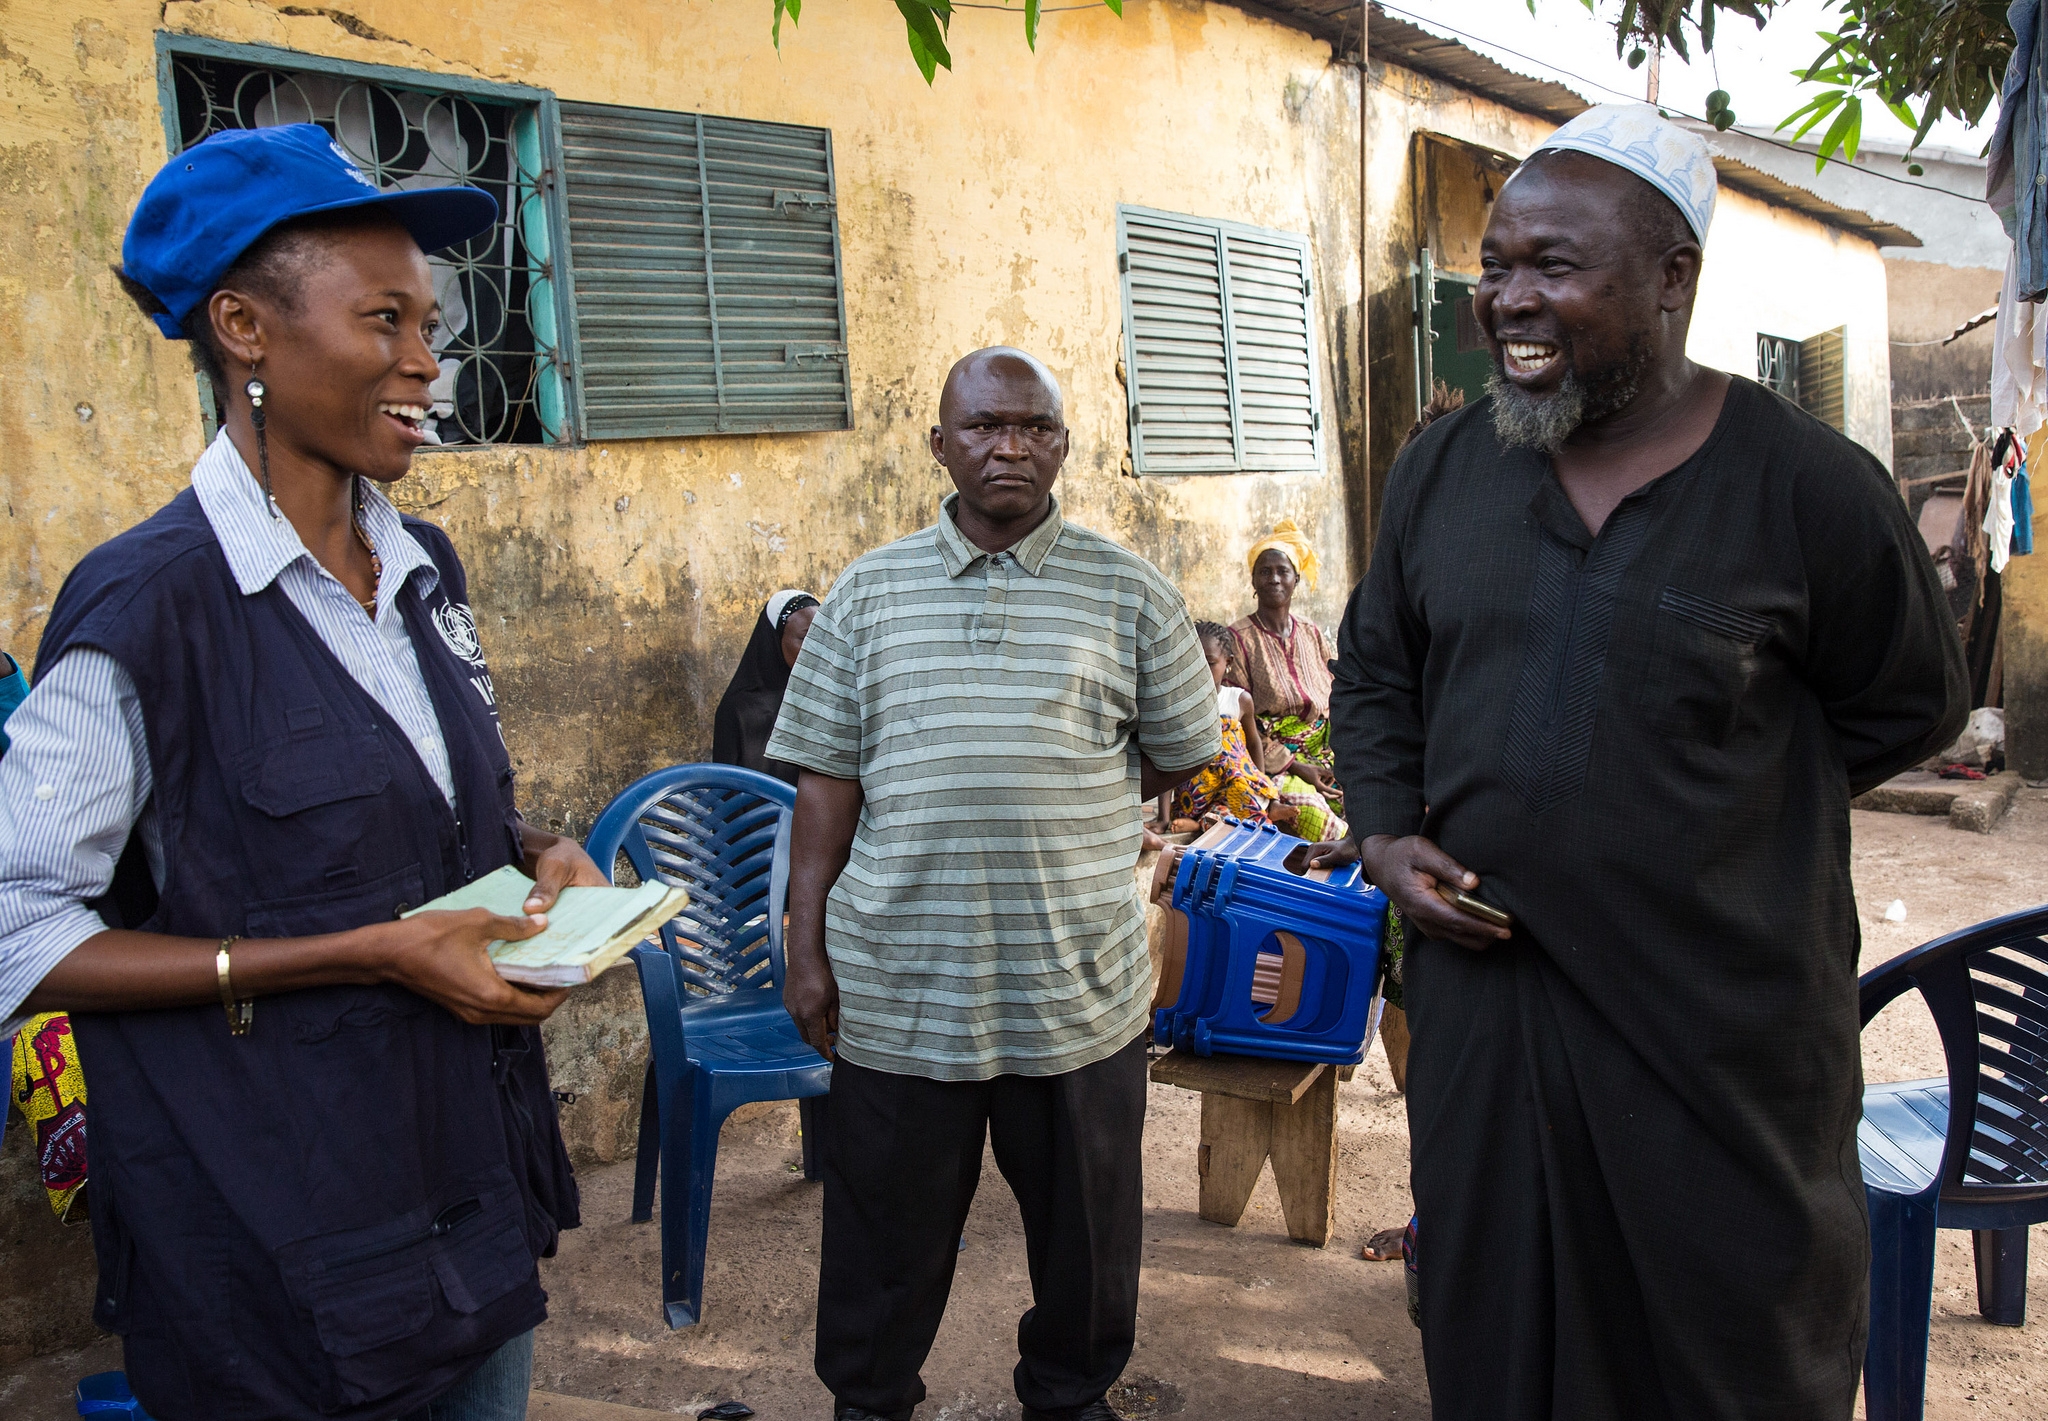 A member of a WHO contact tracing team talks to the head of a family in Conakry, Guinea